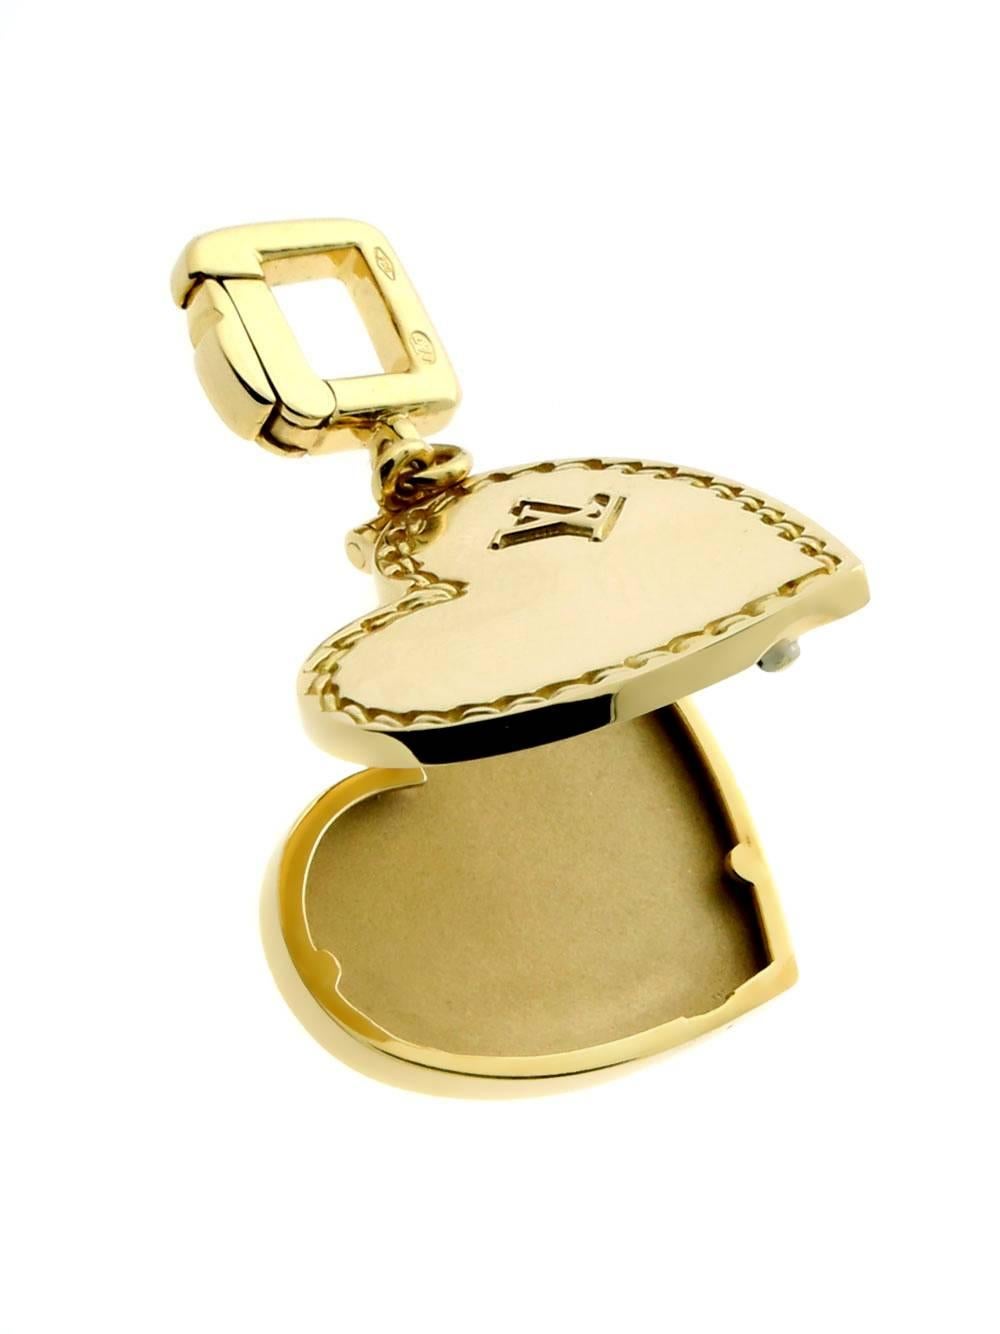 Louis Vuitton heart locket charm pendant in 18k yellow gold with an iconic 